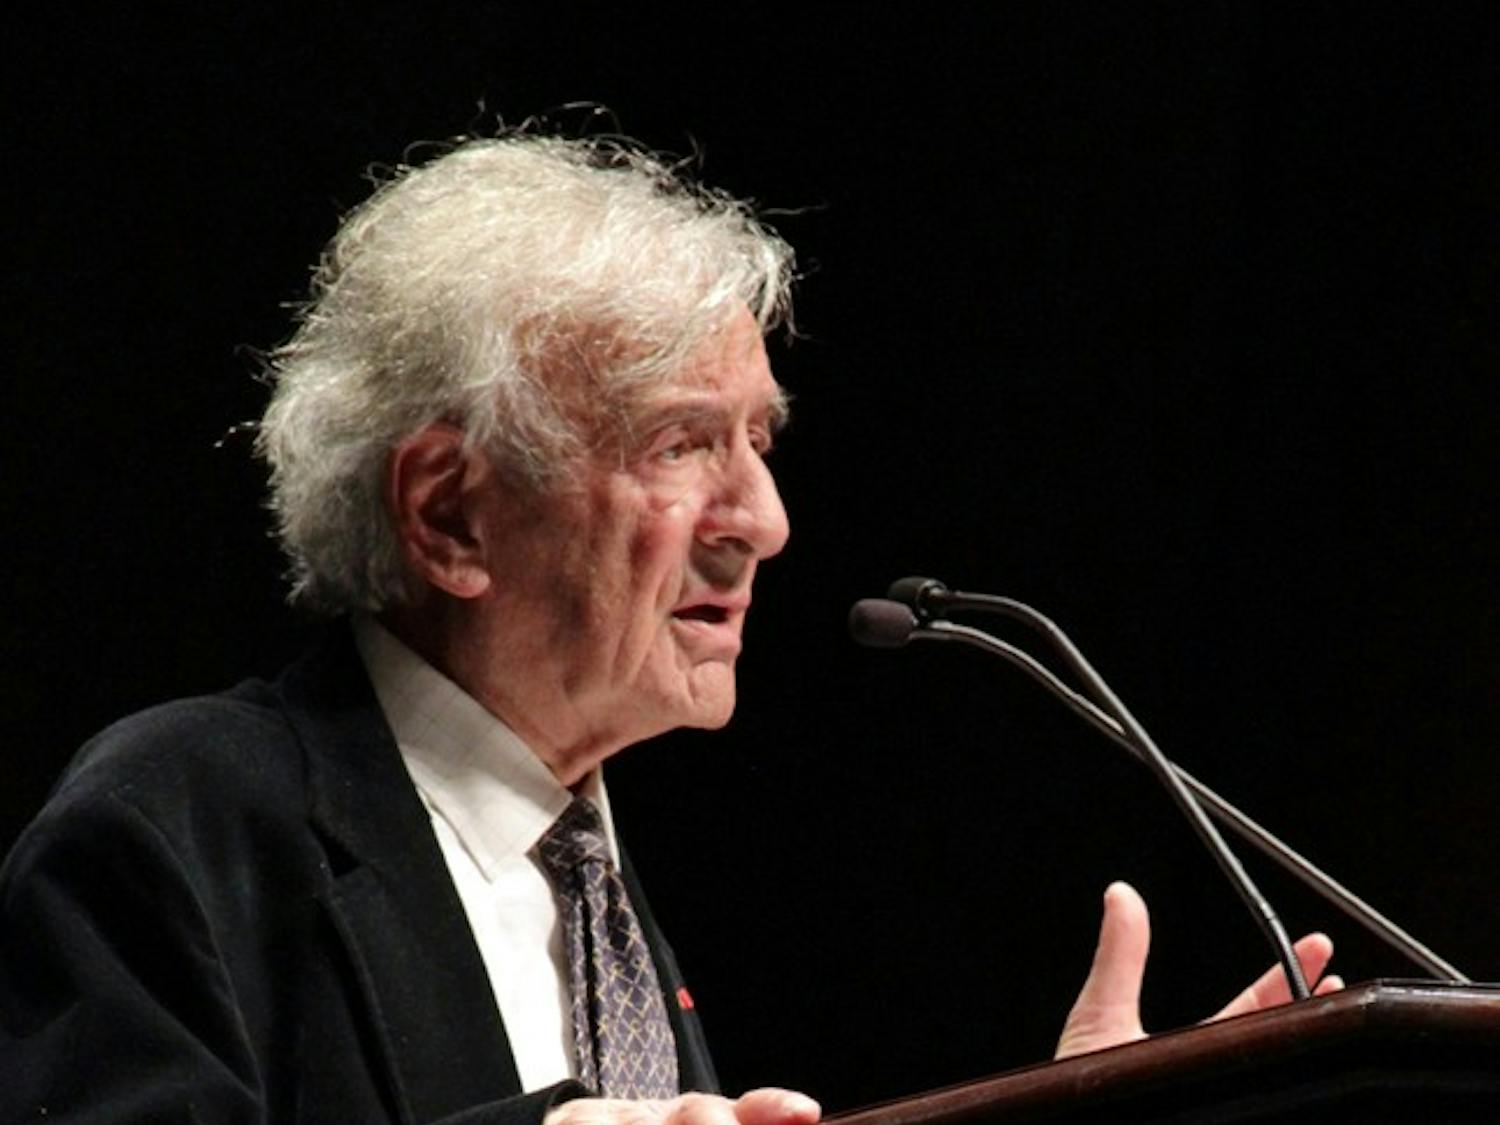 Elie Wiesel gives a speech titled “Against Indifference” in Memorial Hall on Sunday afternoon. Wiesel received the 1986 Nobel Peace Prize.